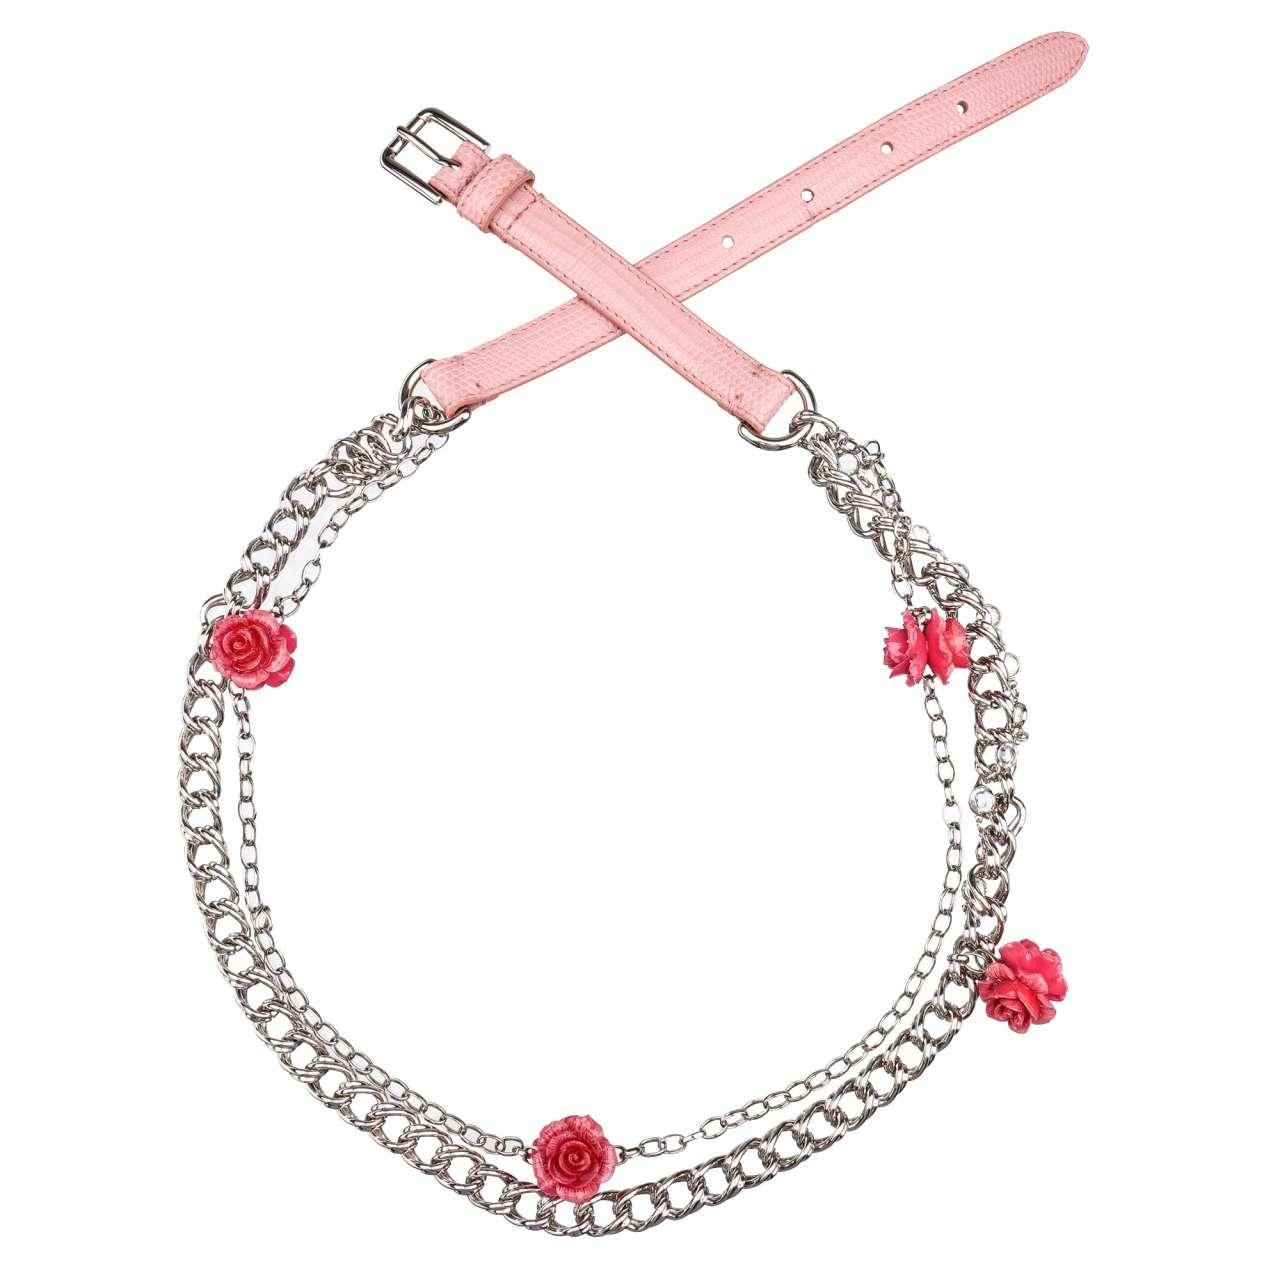 Women's D&G Rose Roses Crystal Lizzard Structure Leather Chain Belt Pink Silver L For Sale